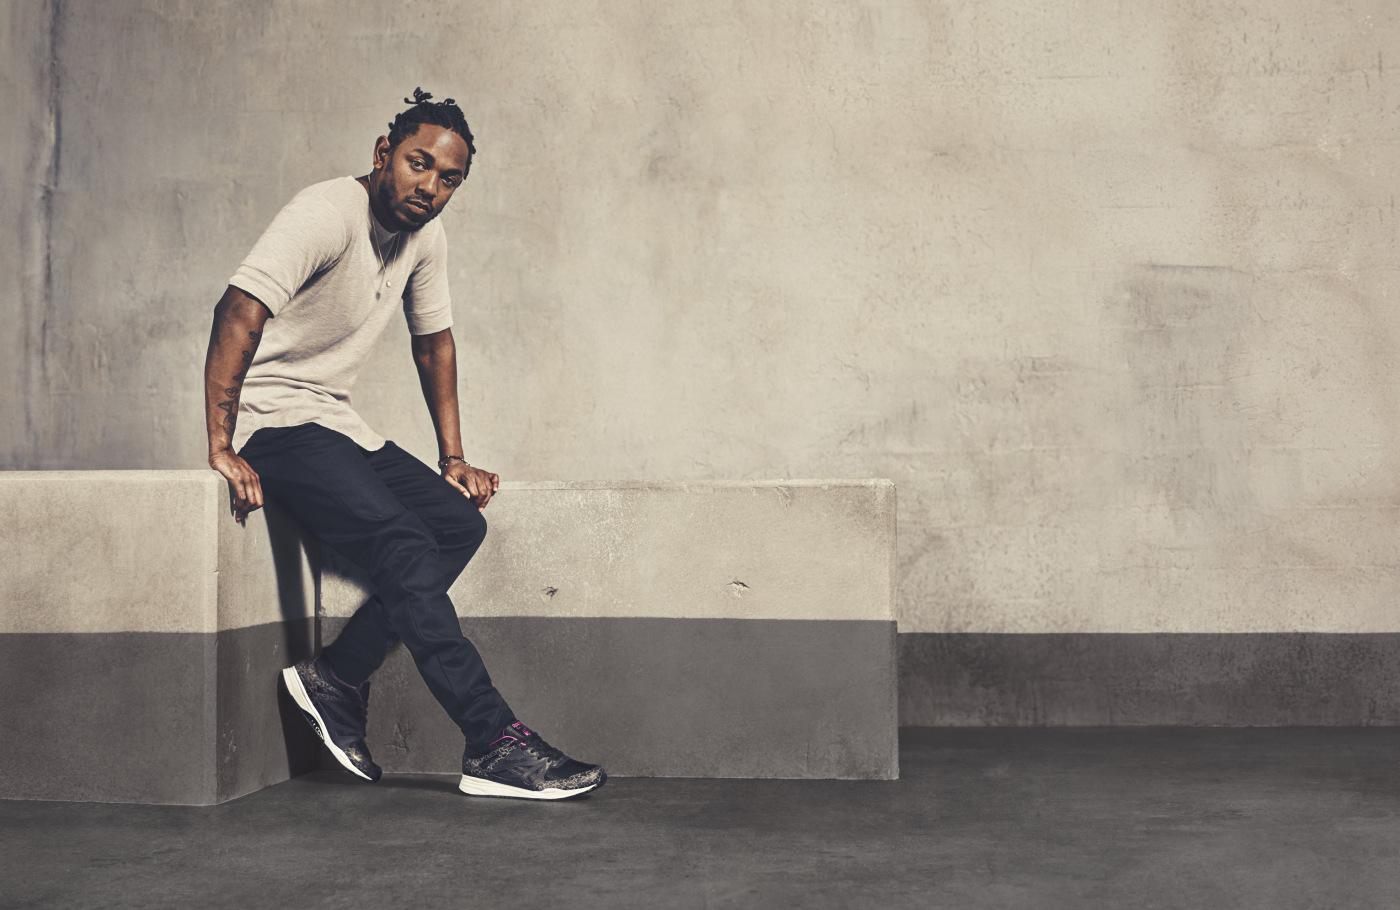 LUST, LOVE, AND THE GOSPEL ACCORDING TO KENDRICK LAMAR